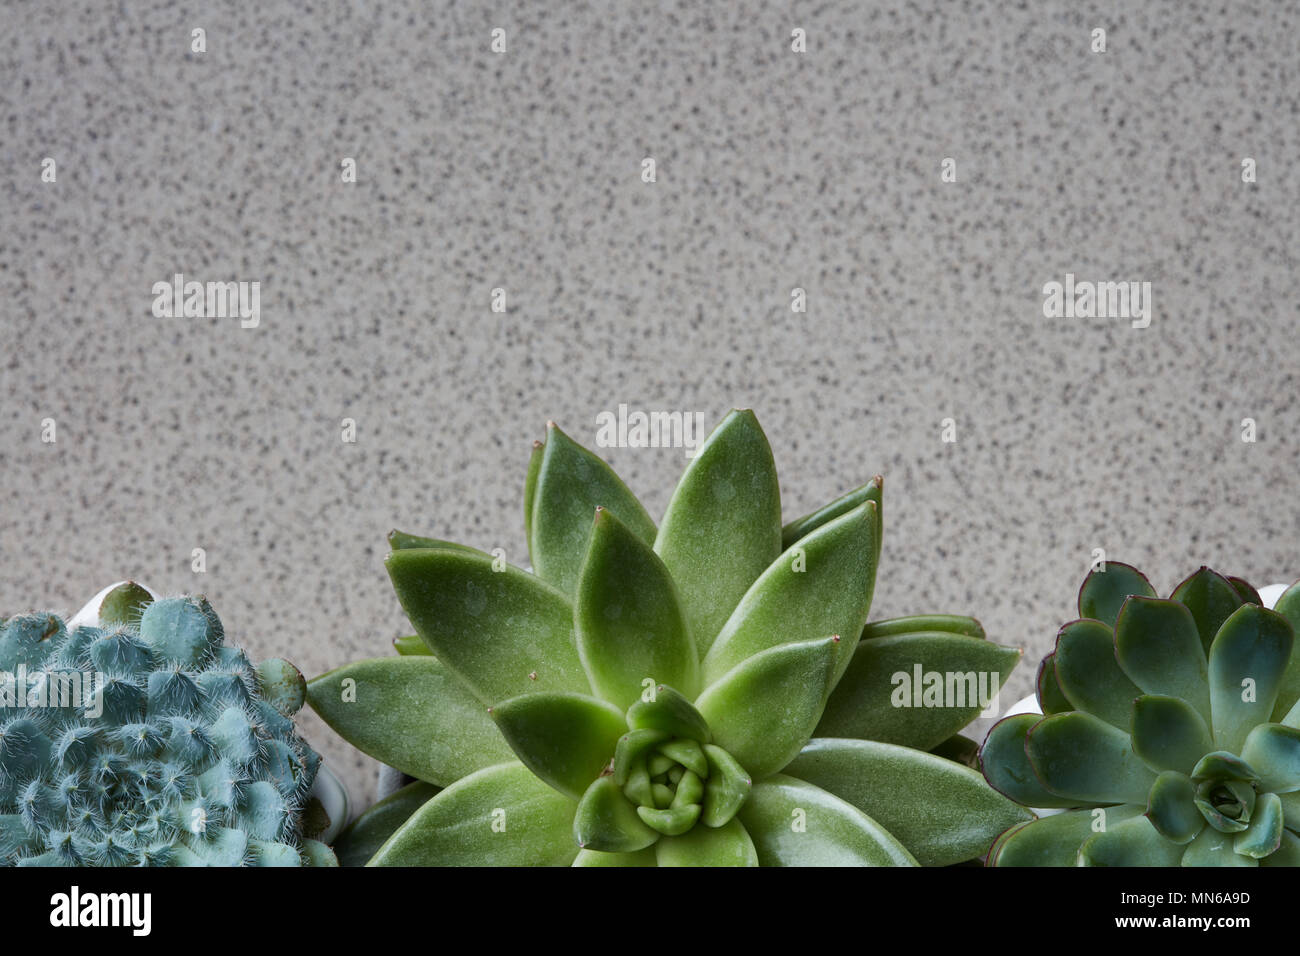 Corner frame from different plants Echeveria on a gray stone background Stock Photo